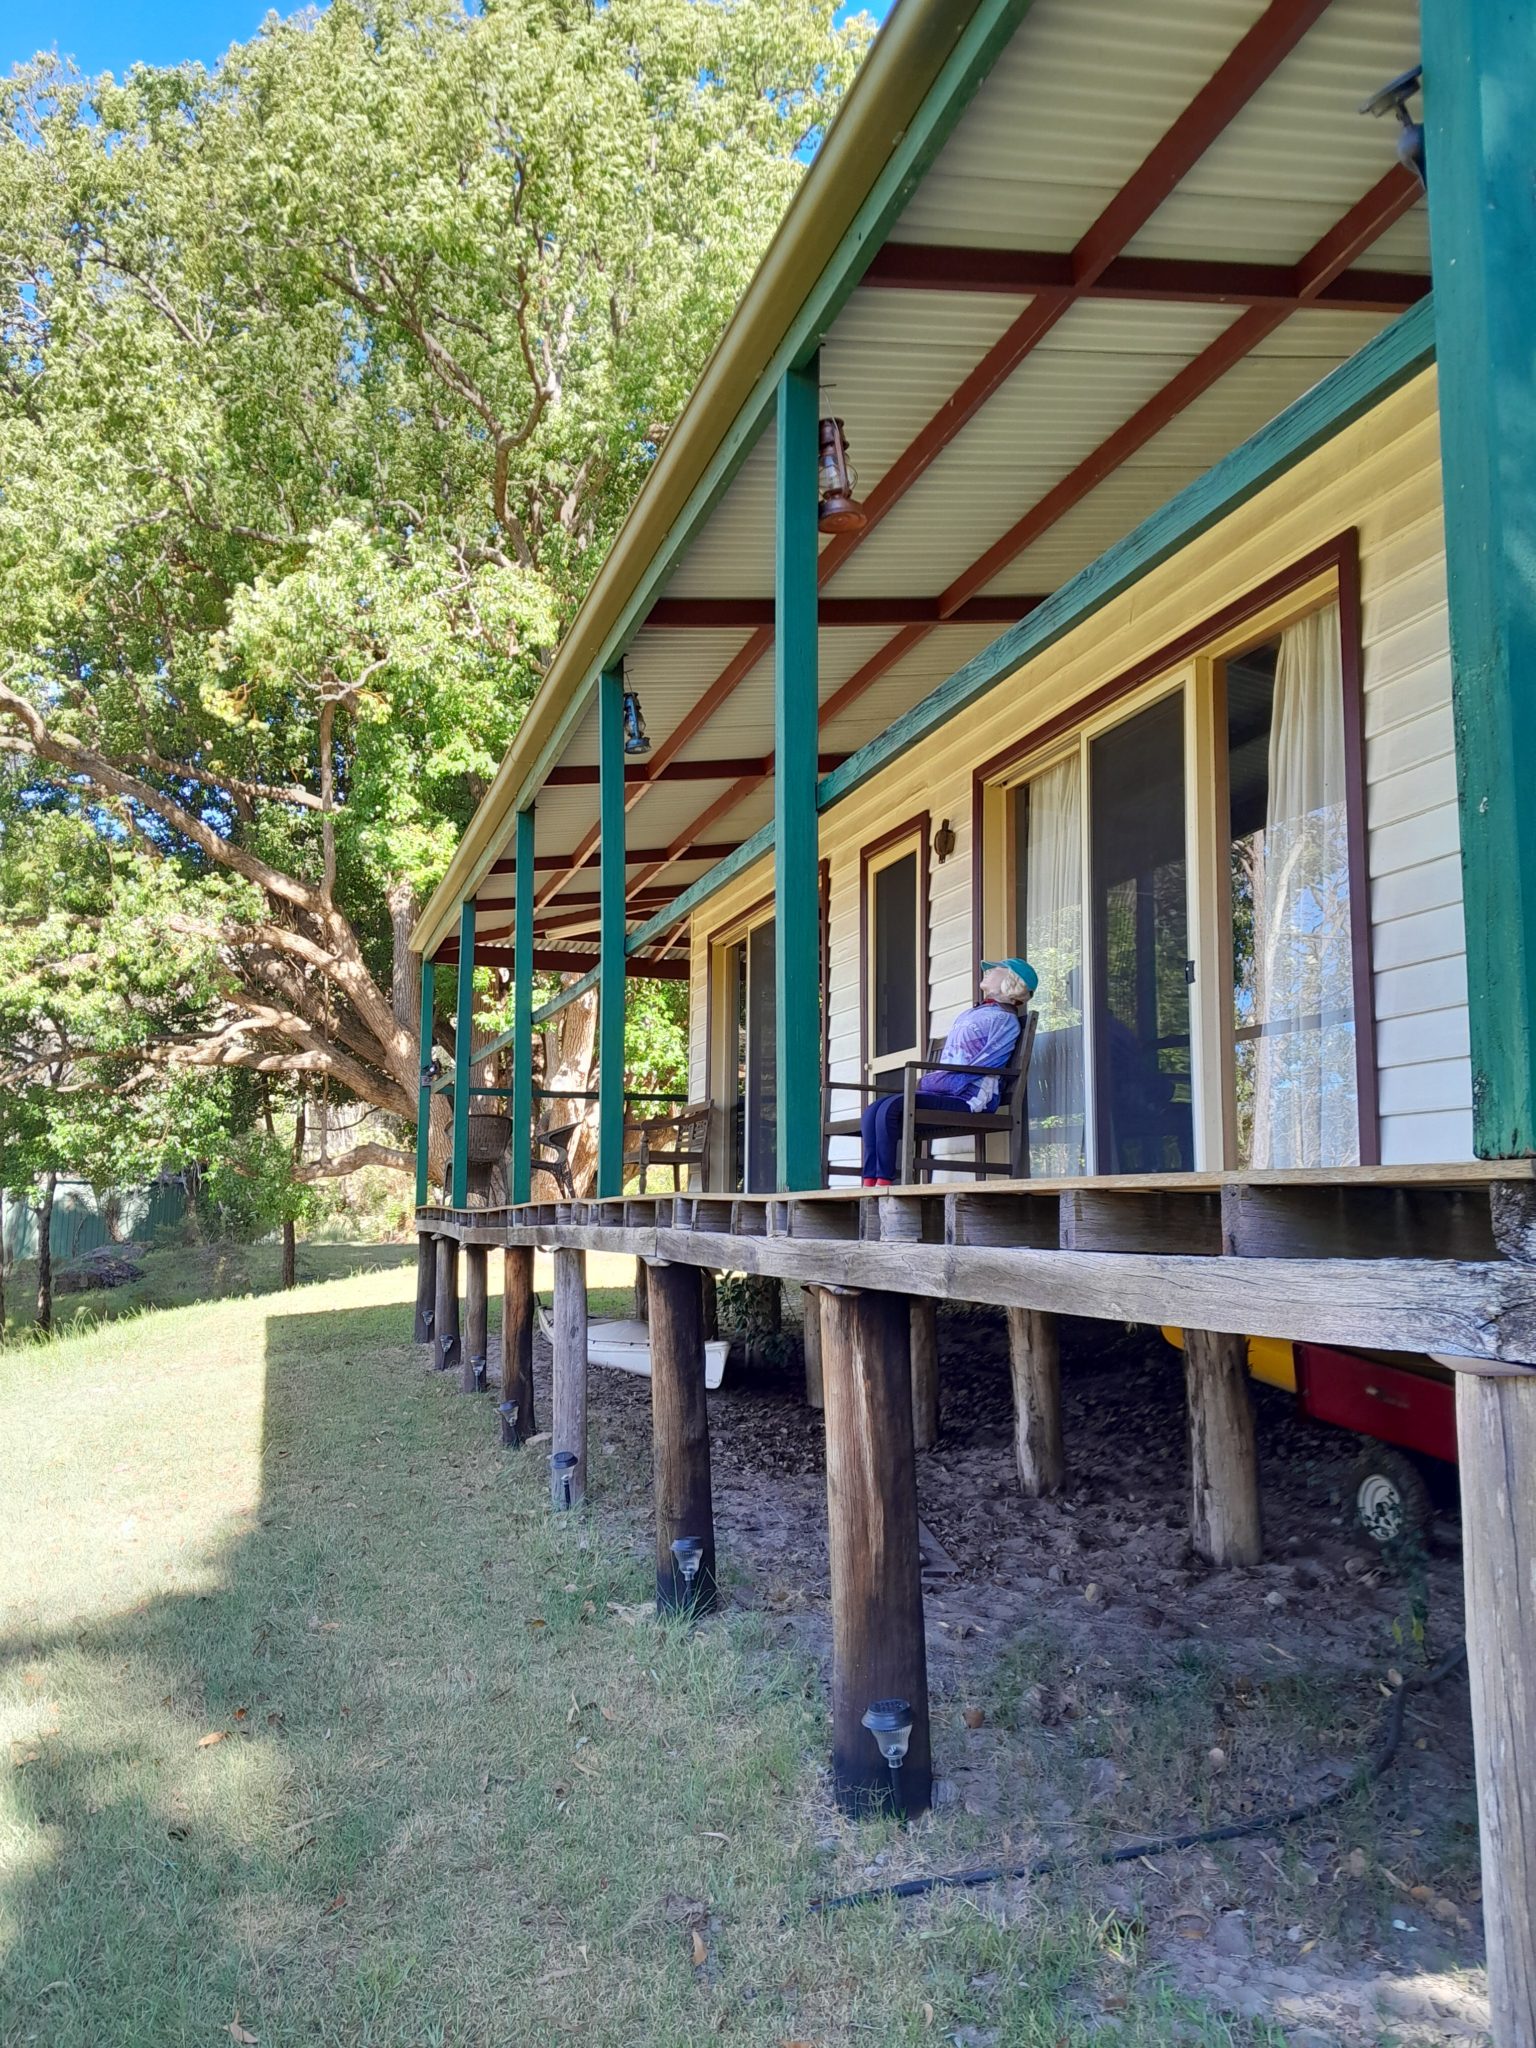 Hawkesbury River Historical Farm and Canoelands